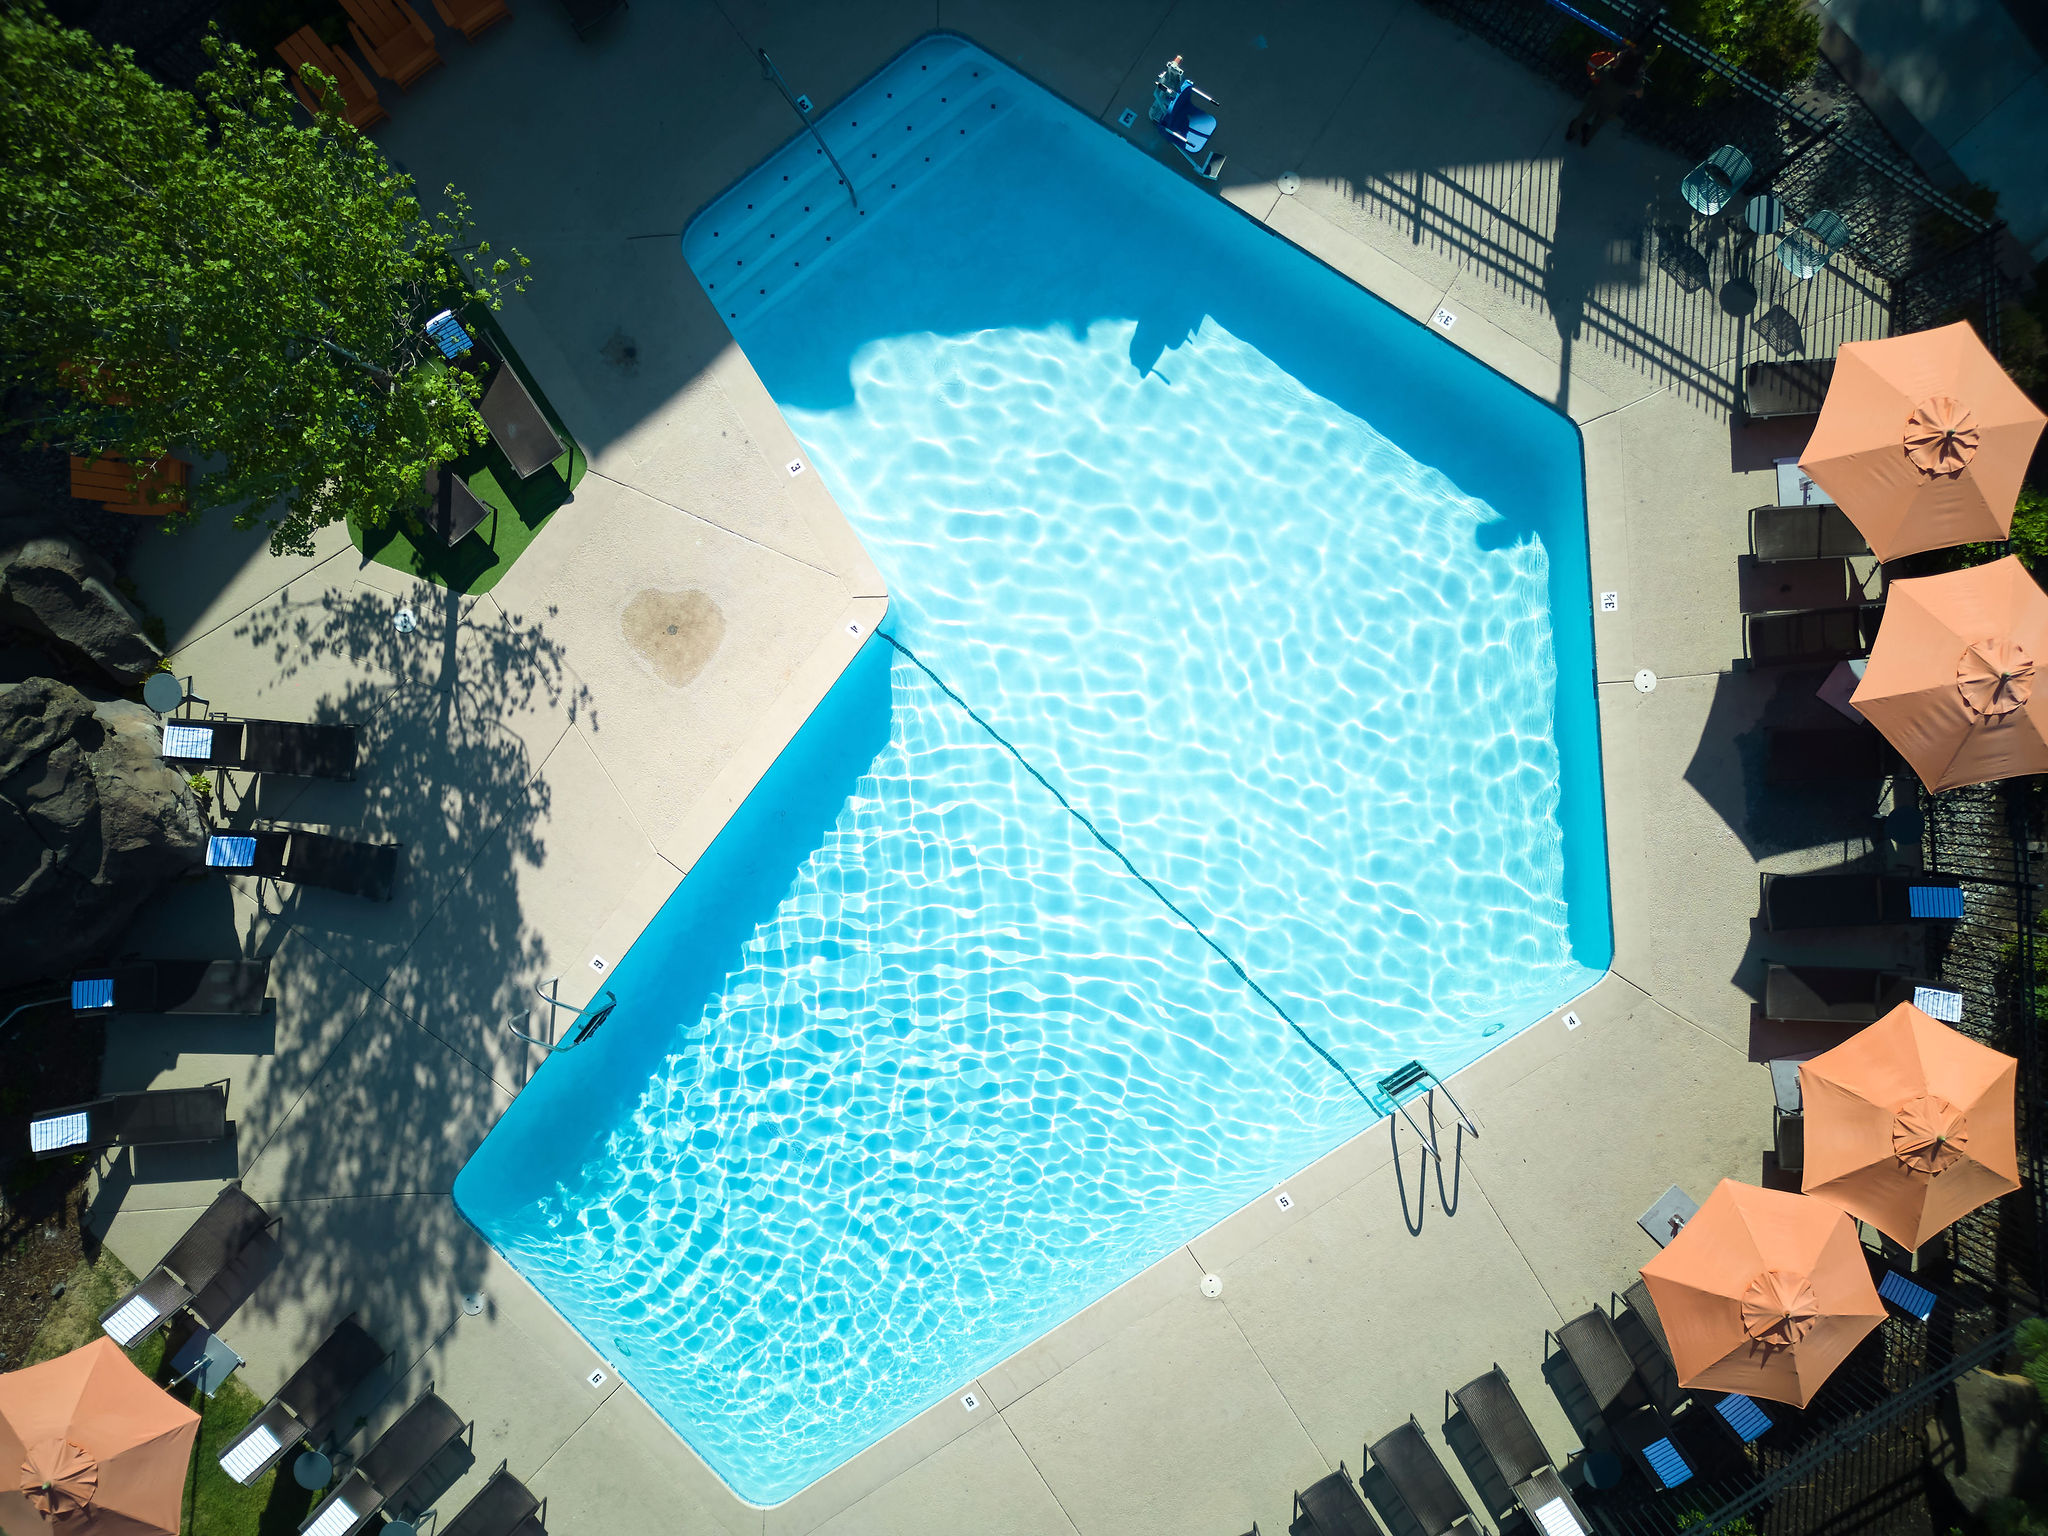 An overhead view of a uniquely shaped swimming pool surrounded by lounge chairs and umbrellas, with a few people relaxing nearby.